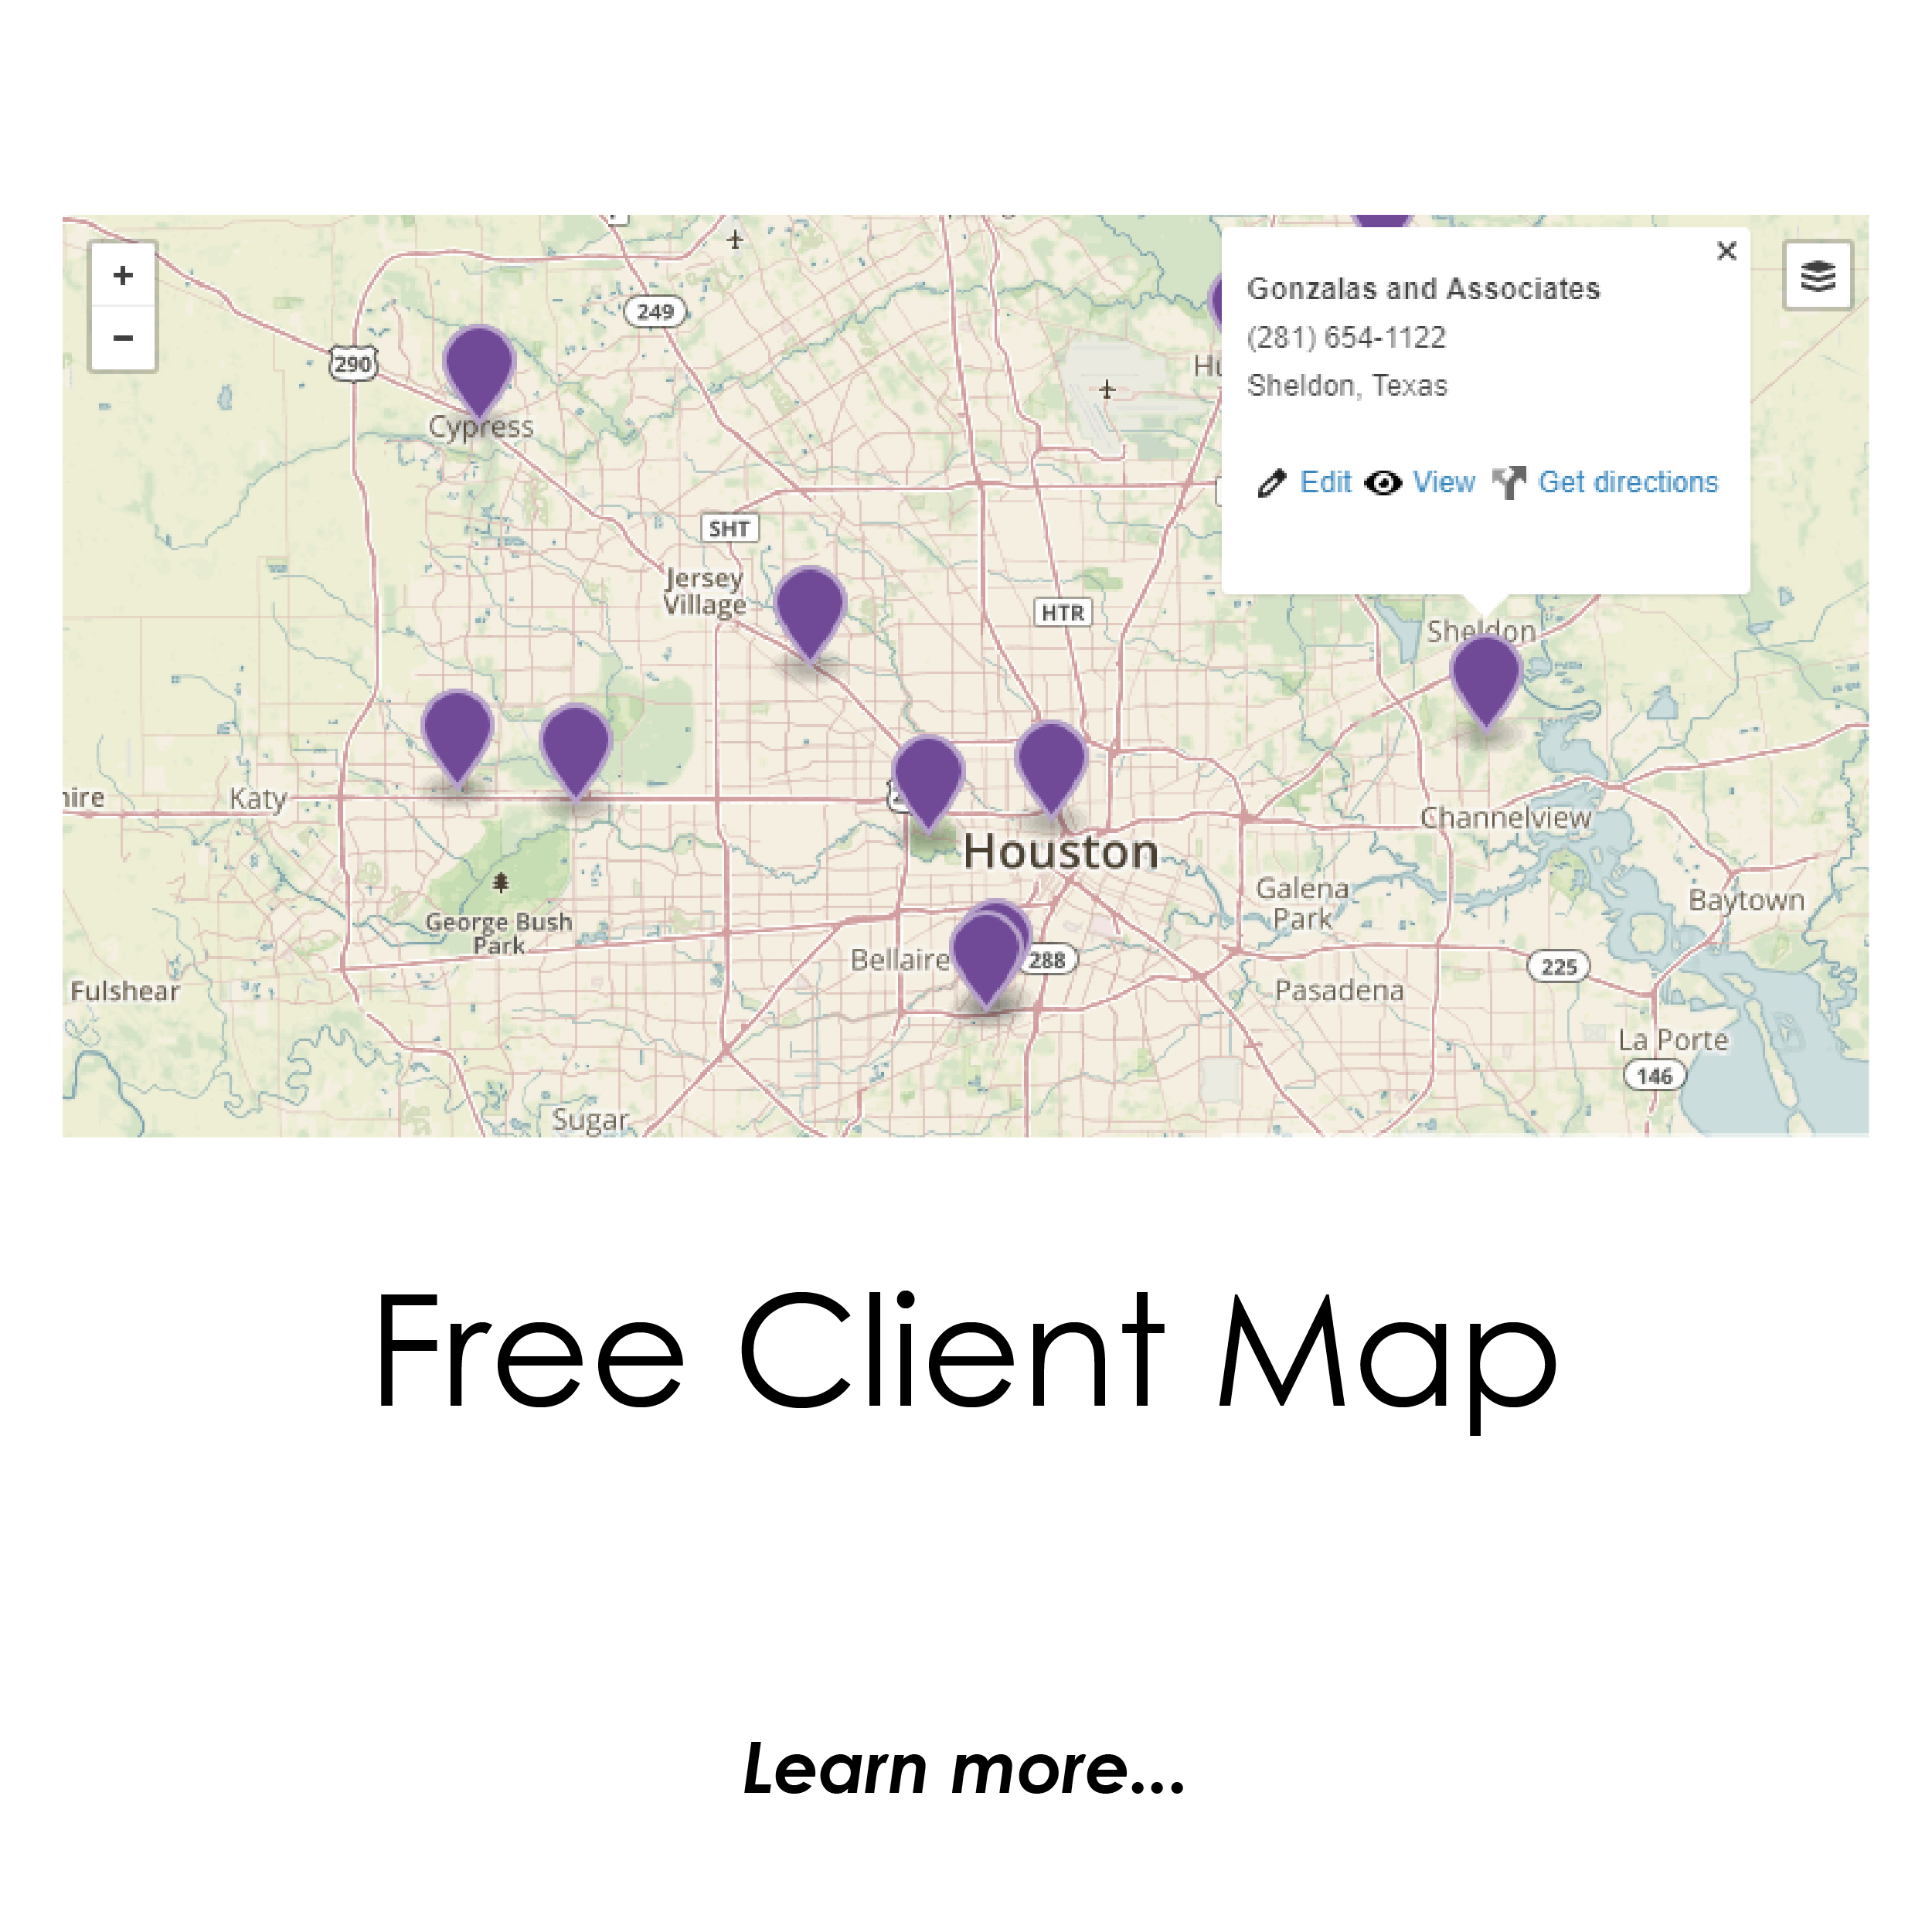 Free Client Map